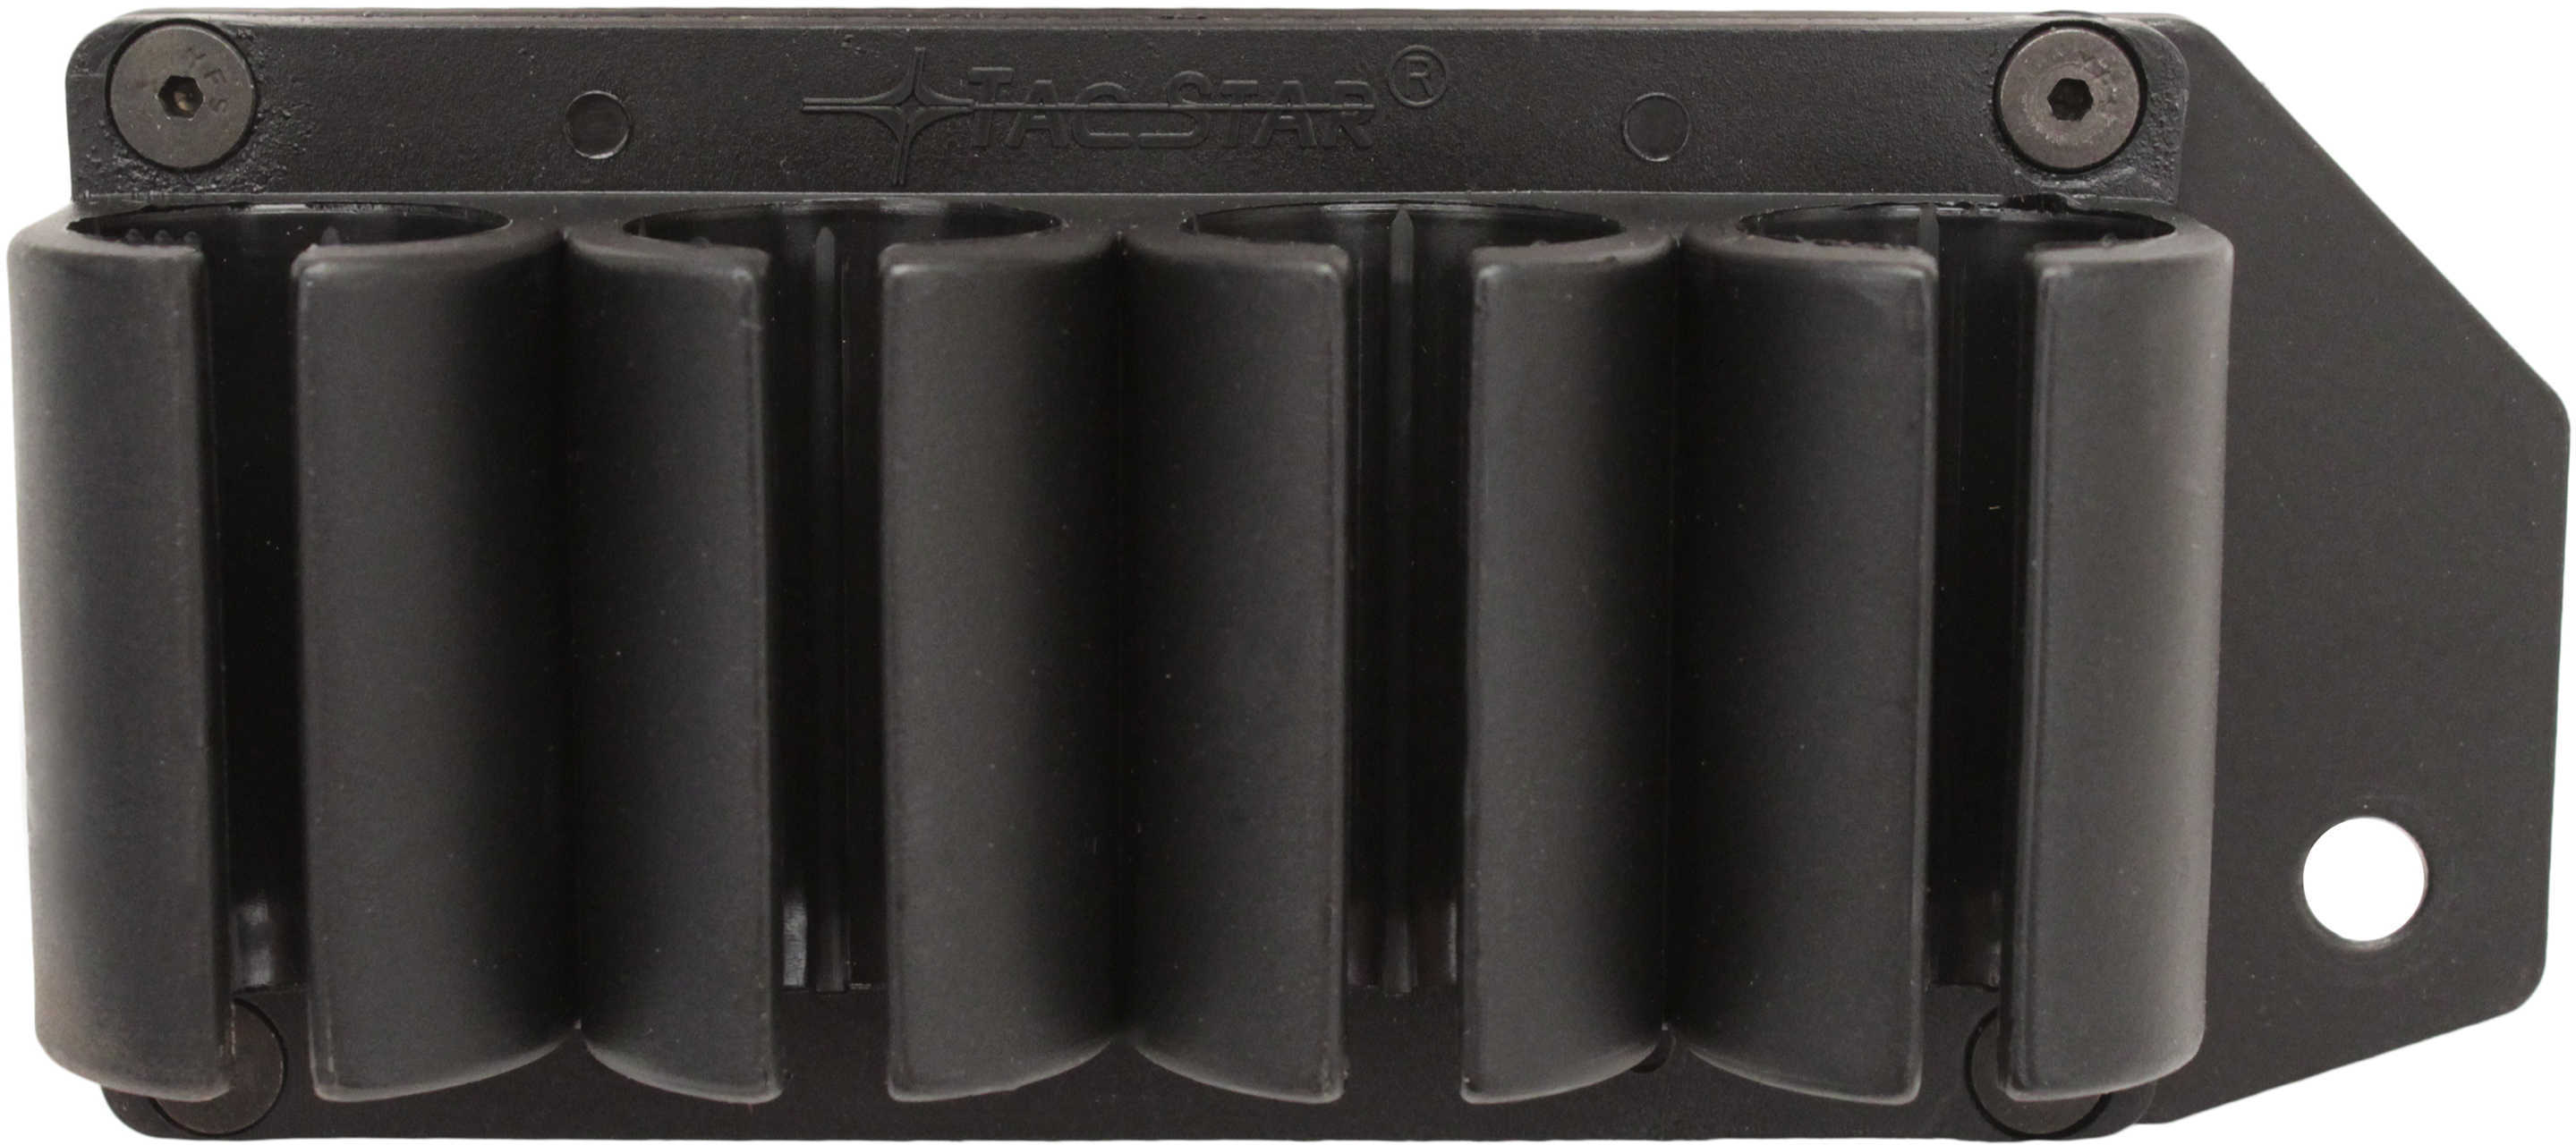 Pachmayr TacStar 20 Gauge 4 Rounds Sidesaddle Carrier For Remington 870/1100/11-87 Md: 1081130